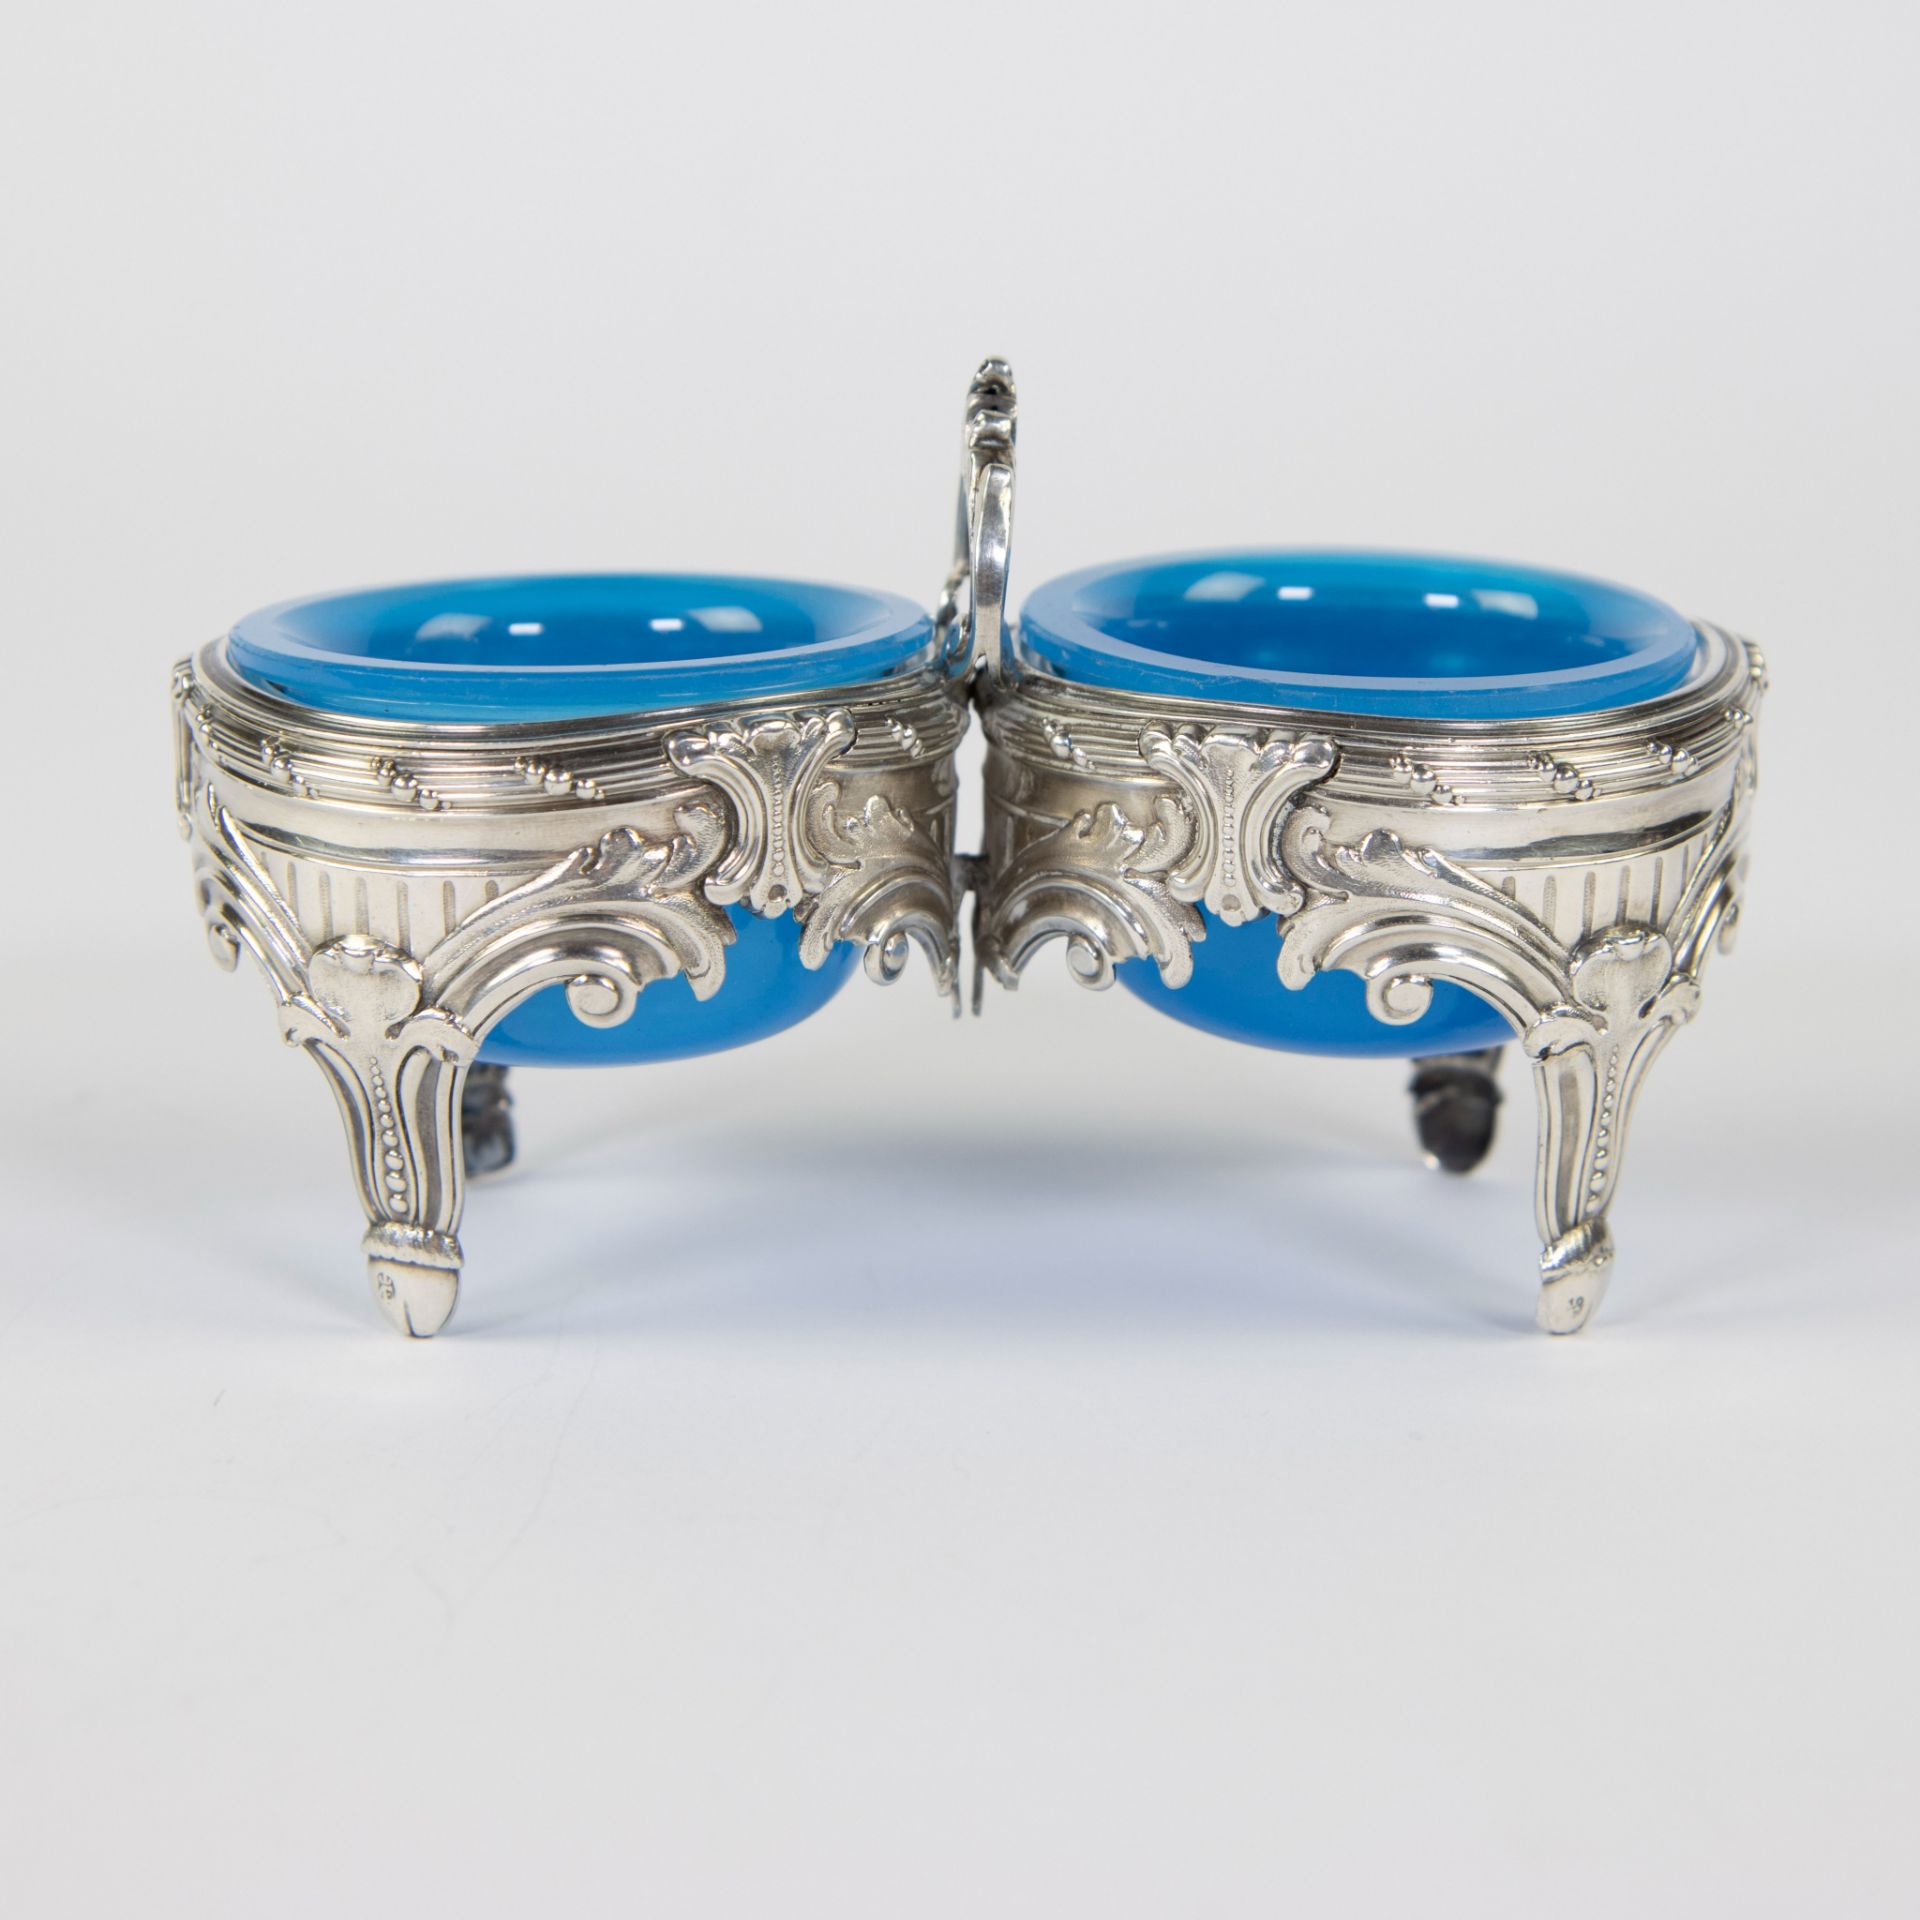 Silver salt cellar with light blue glass compartments, Mons, 18th century - Image 3 of 6